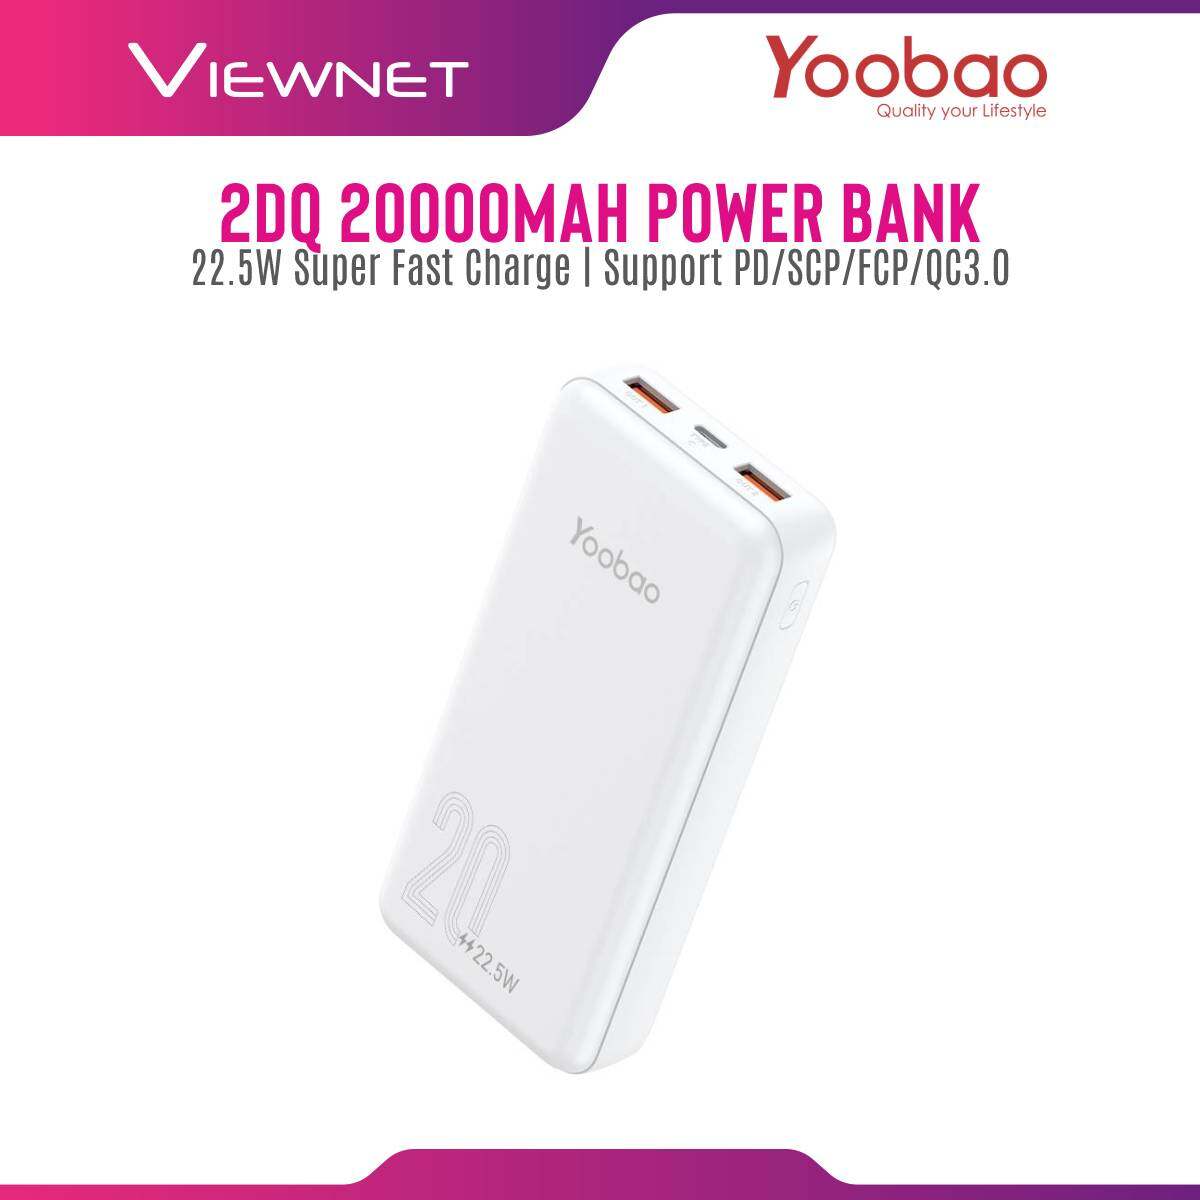 Yoobao D20Q 20000mAh 22.5W Super Fast Charge Power Bank Support PD/SCP/FCP/QC3.0 with Dual Output